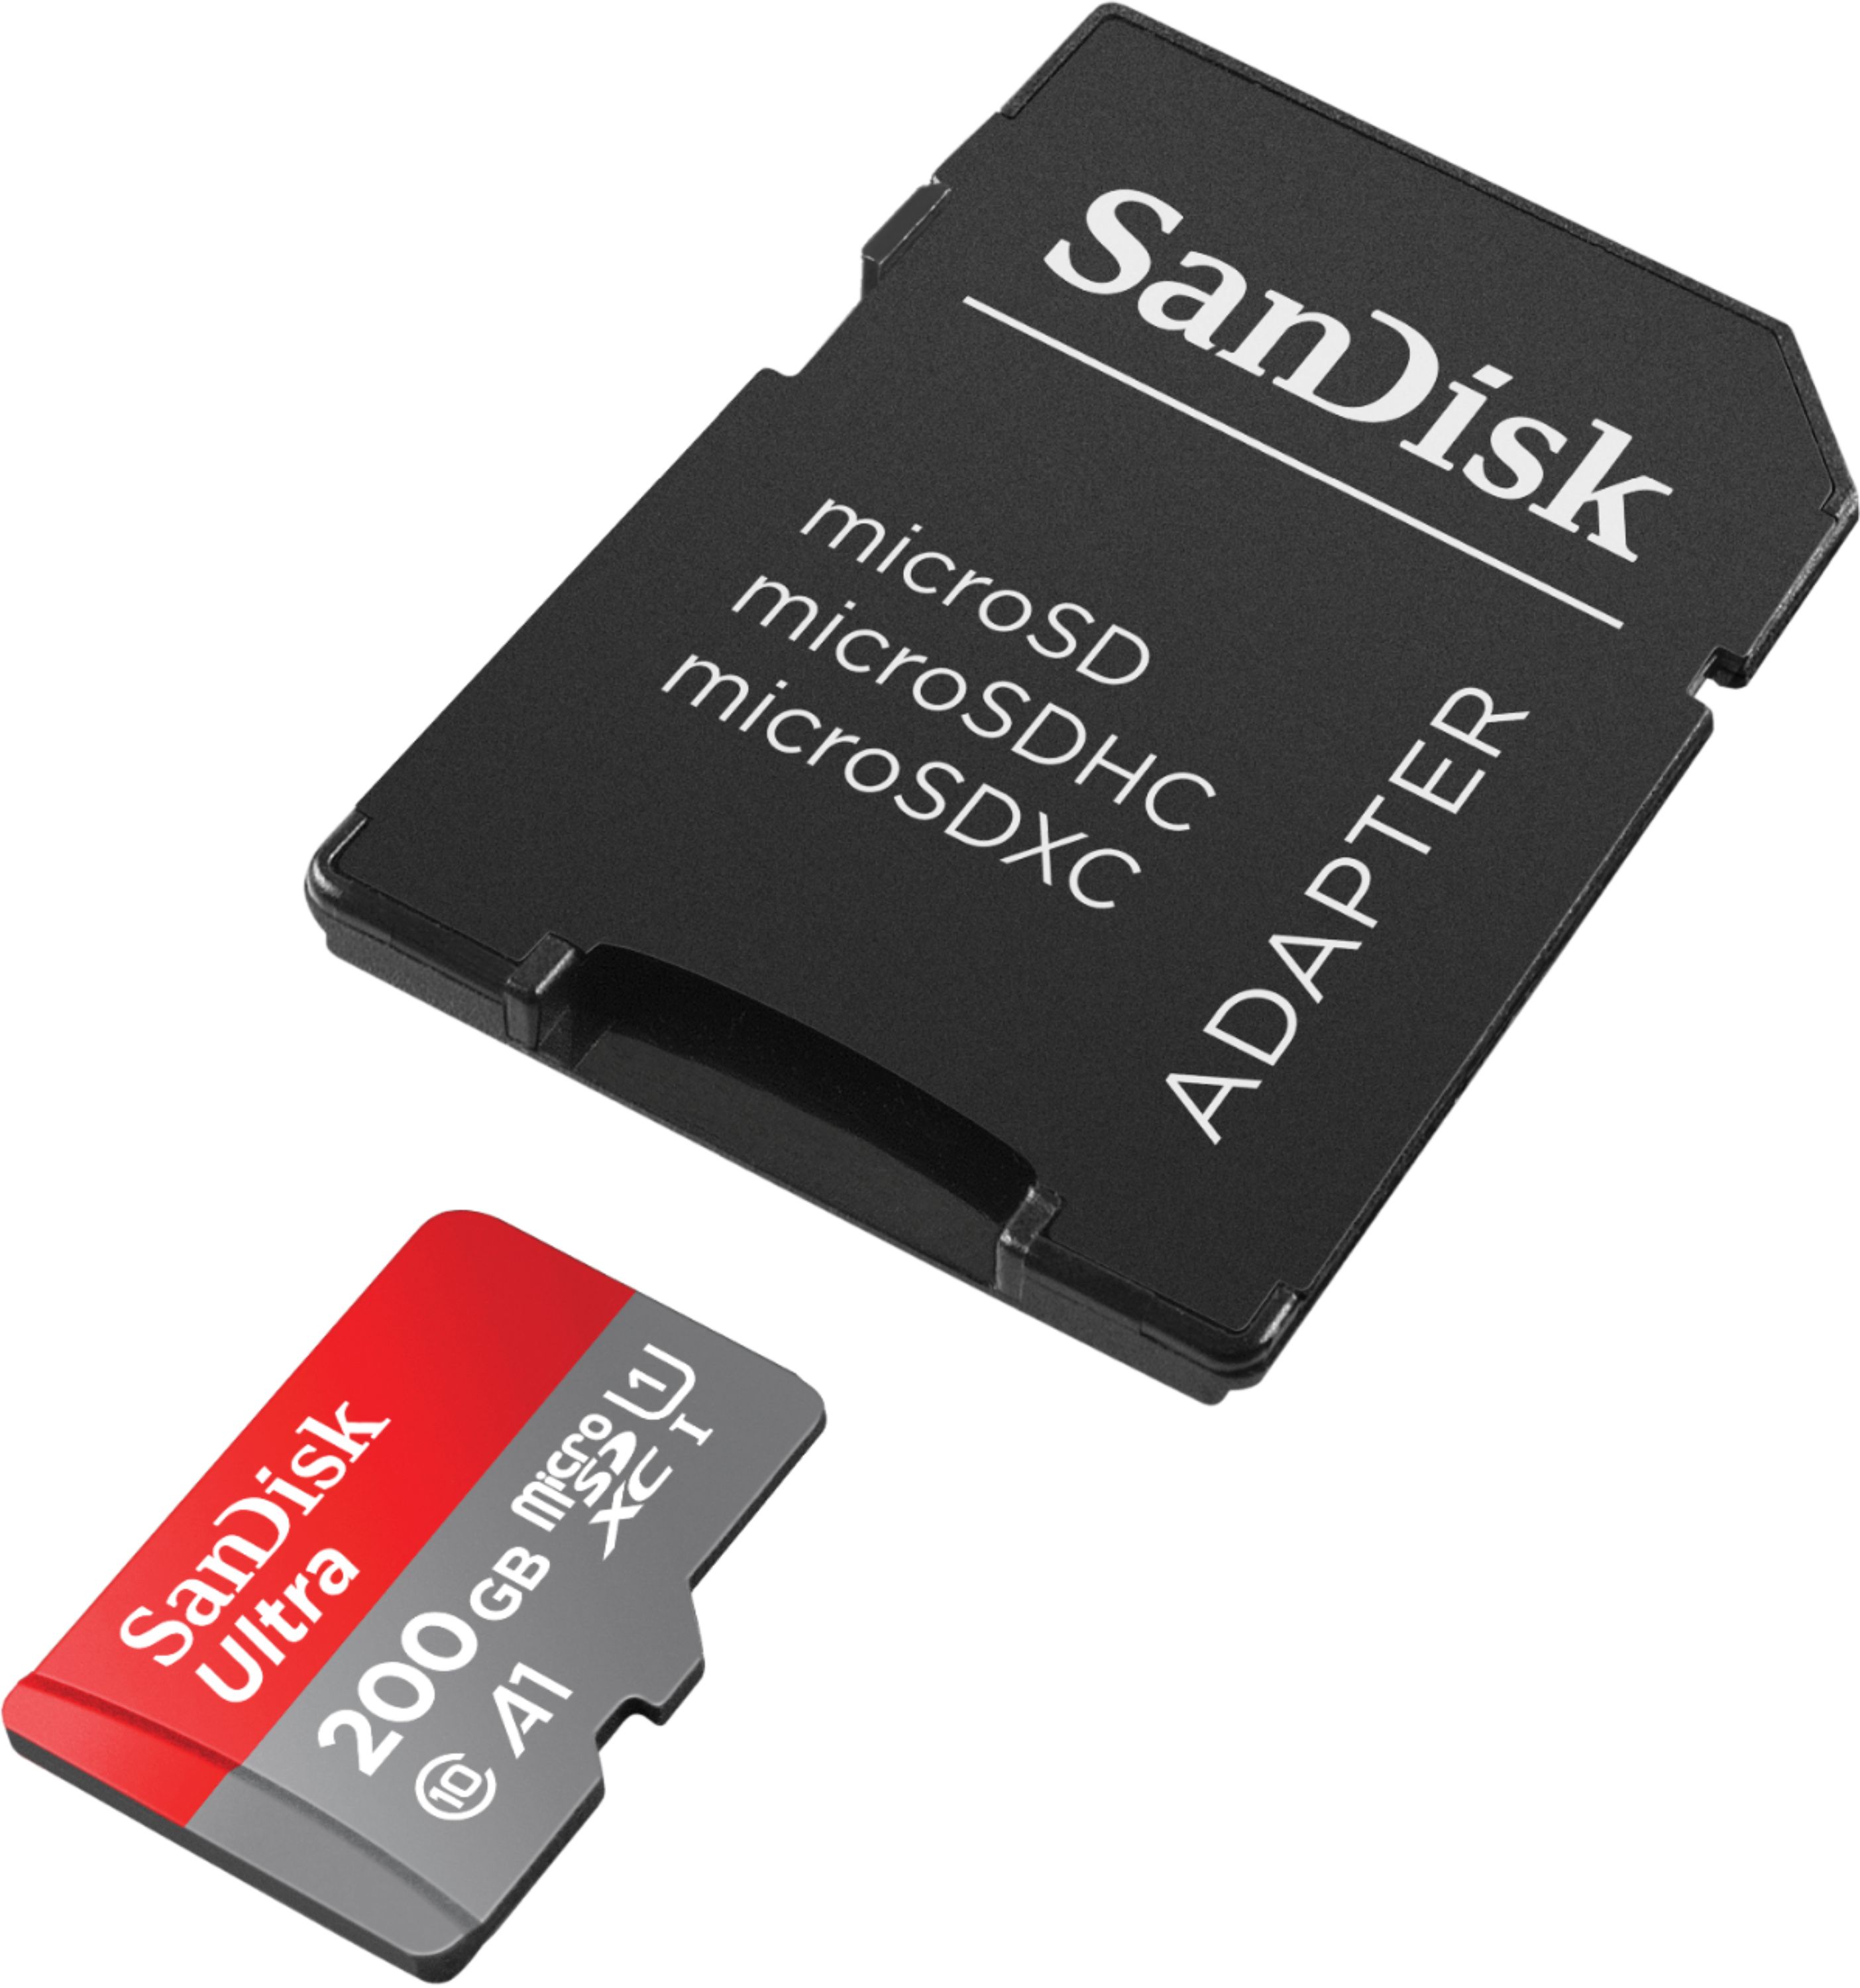 SanDisk Ultra 200GB MicroSDXC Verified for LG Tribute by SanFlash 100MBs A1 U1 C10 Works with SanDisk 